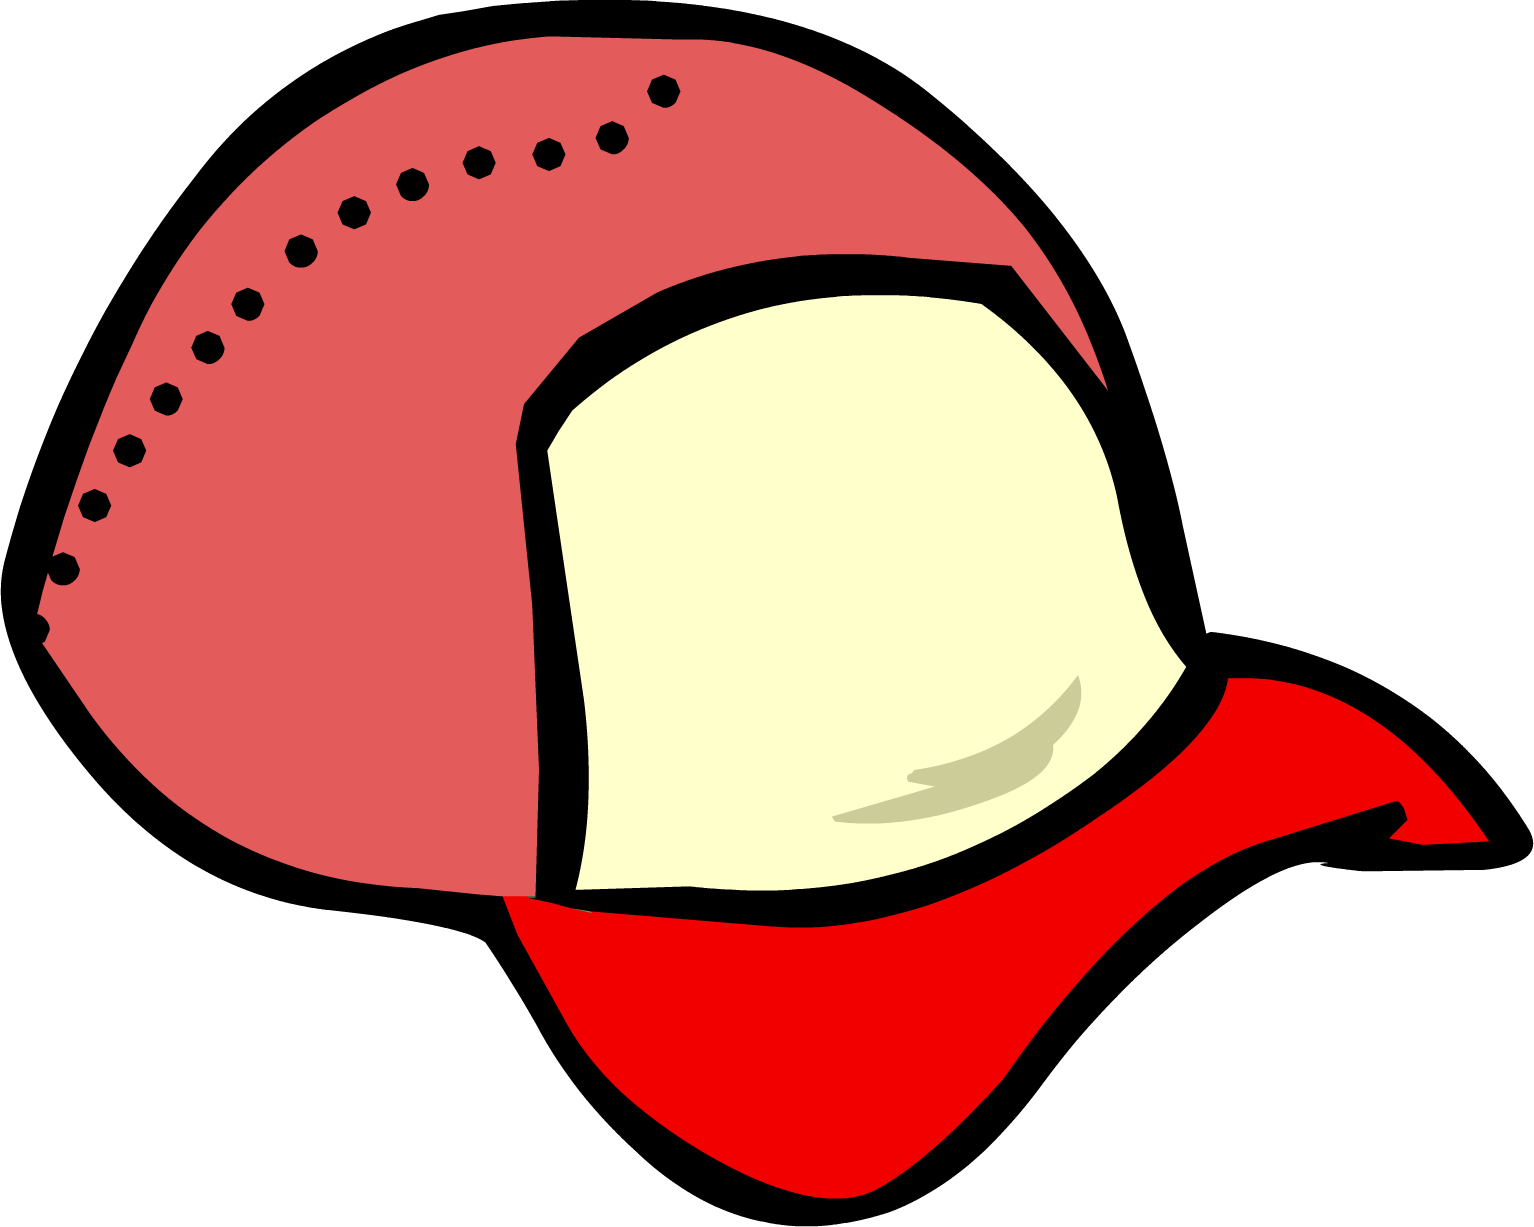 Free Cowboy Hat And Boots Clipart - Club Penguin Red Hat (1534x1227)